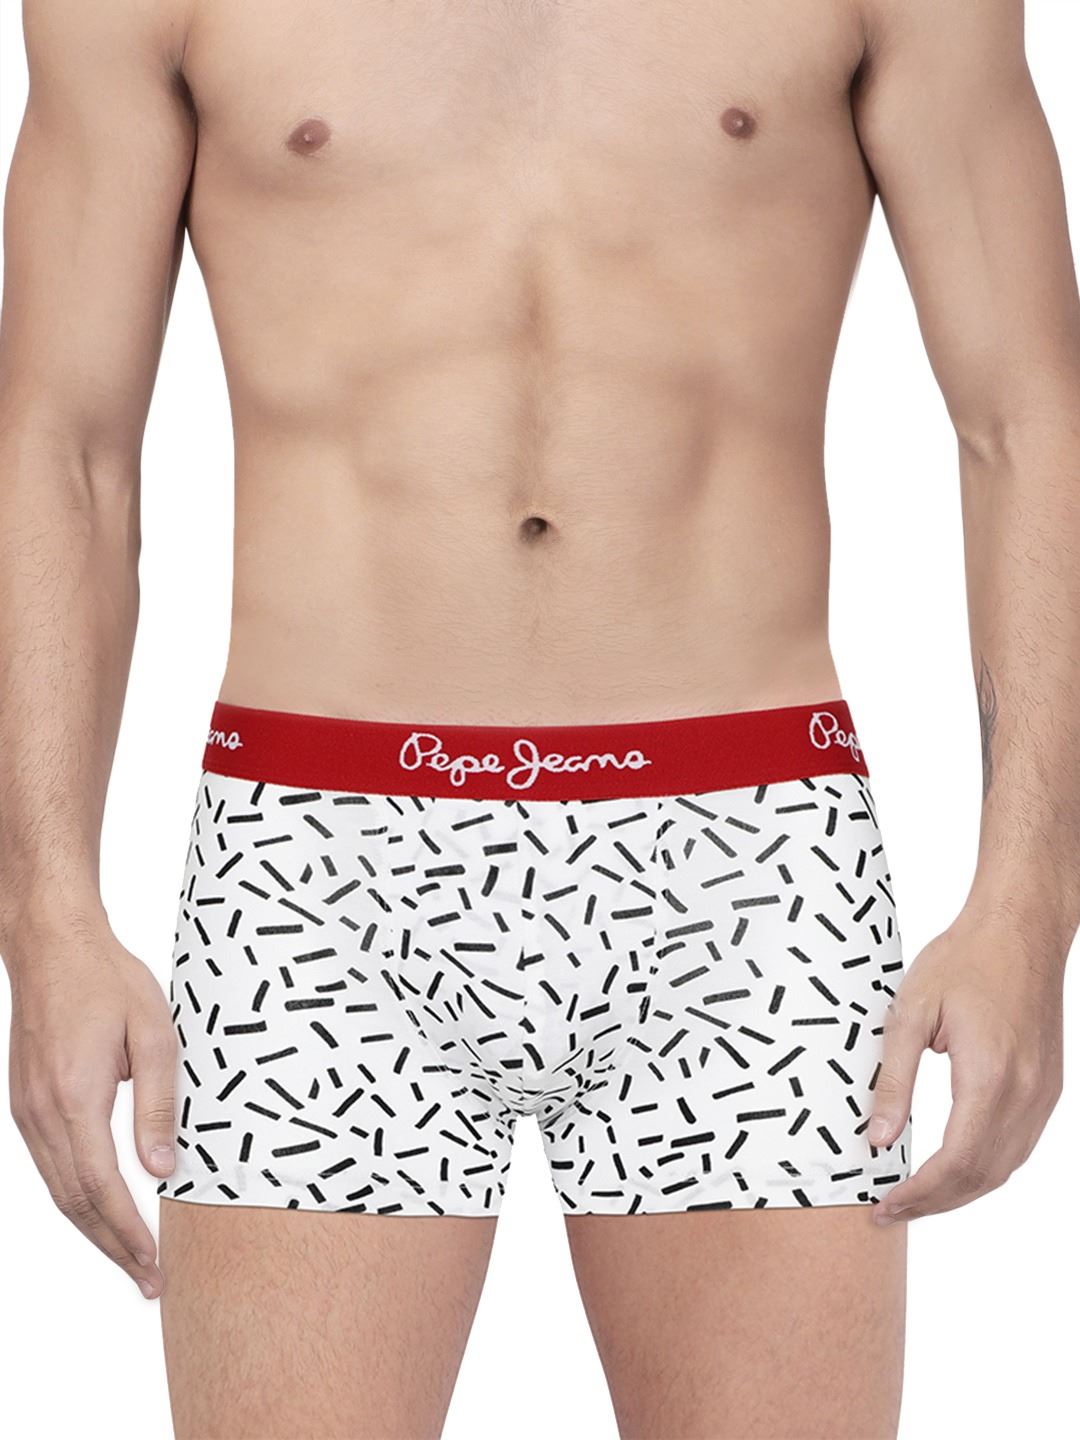 Pepe Jeans London Men Printed White Trunk Pack Of 1